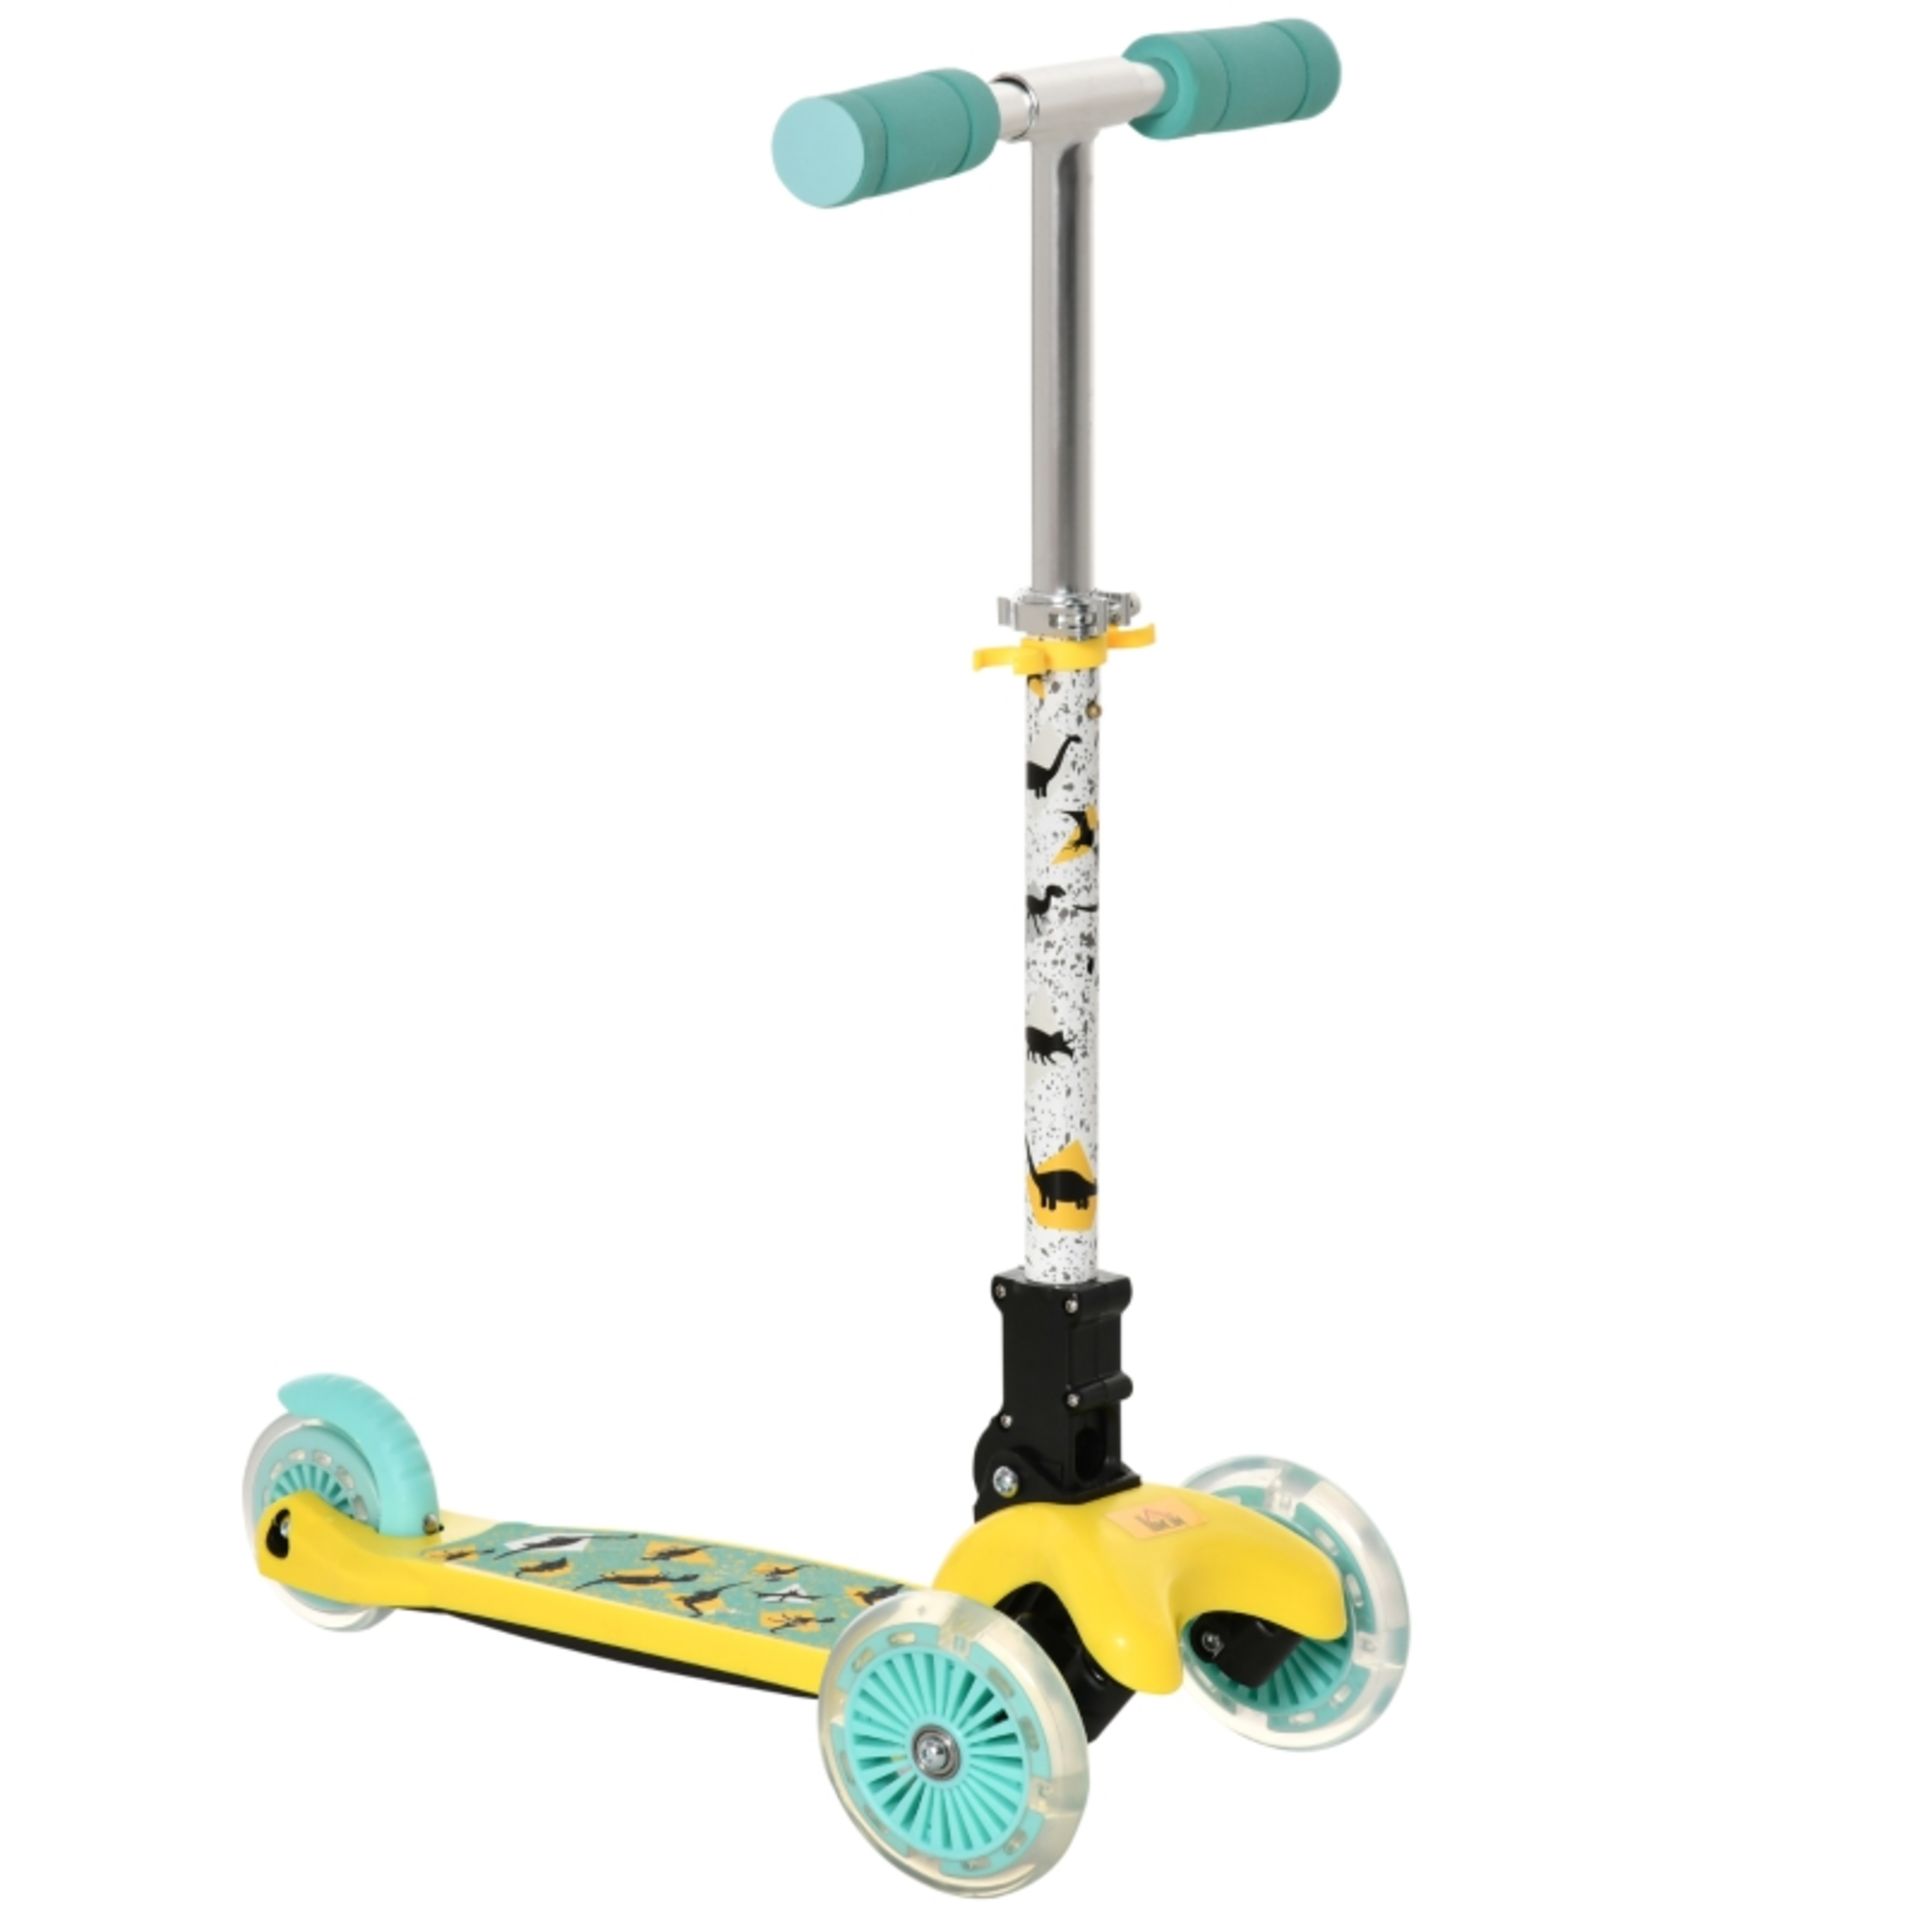 RPP £39.99 -HOMCOM Foldable Scooter for Kids with 3 Wheel Adjustable Height Flashing Wheels - Image 2 of 4